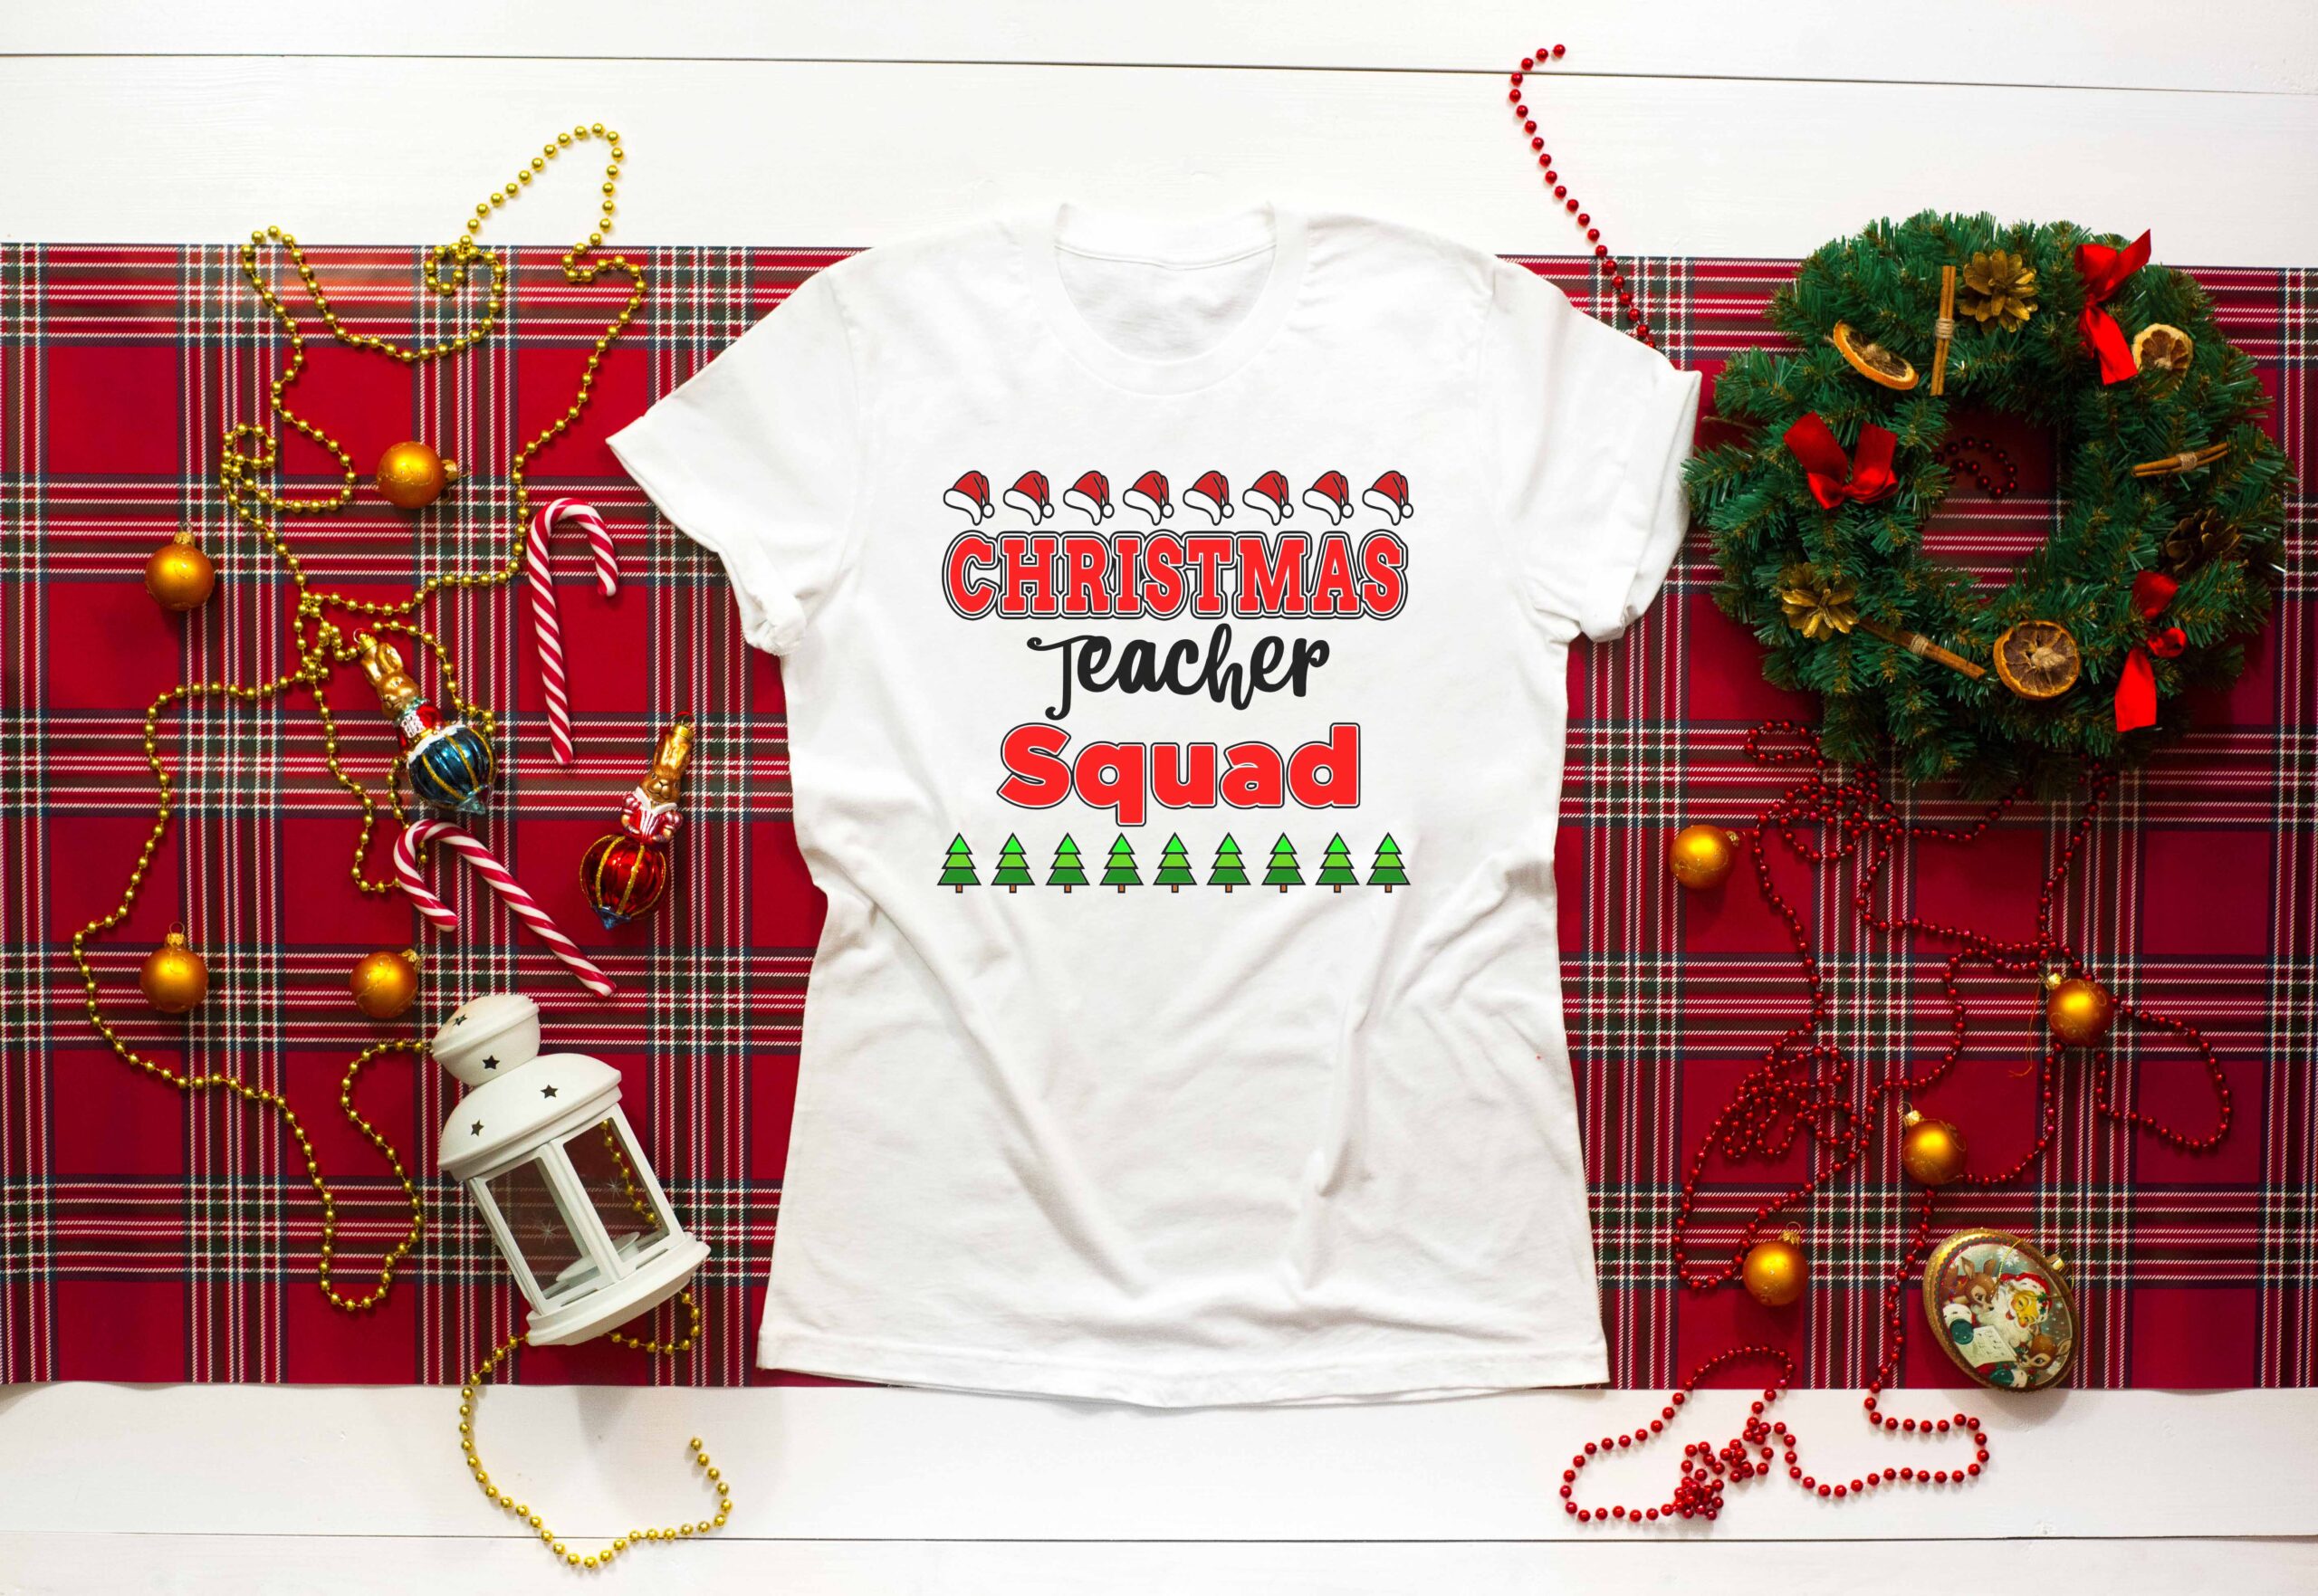 Free Christmas Teacher Squad SVG Cutting File for the Cricut.